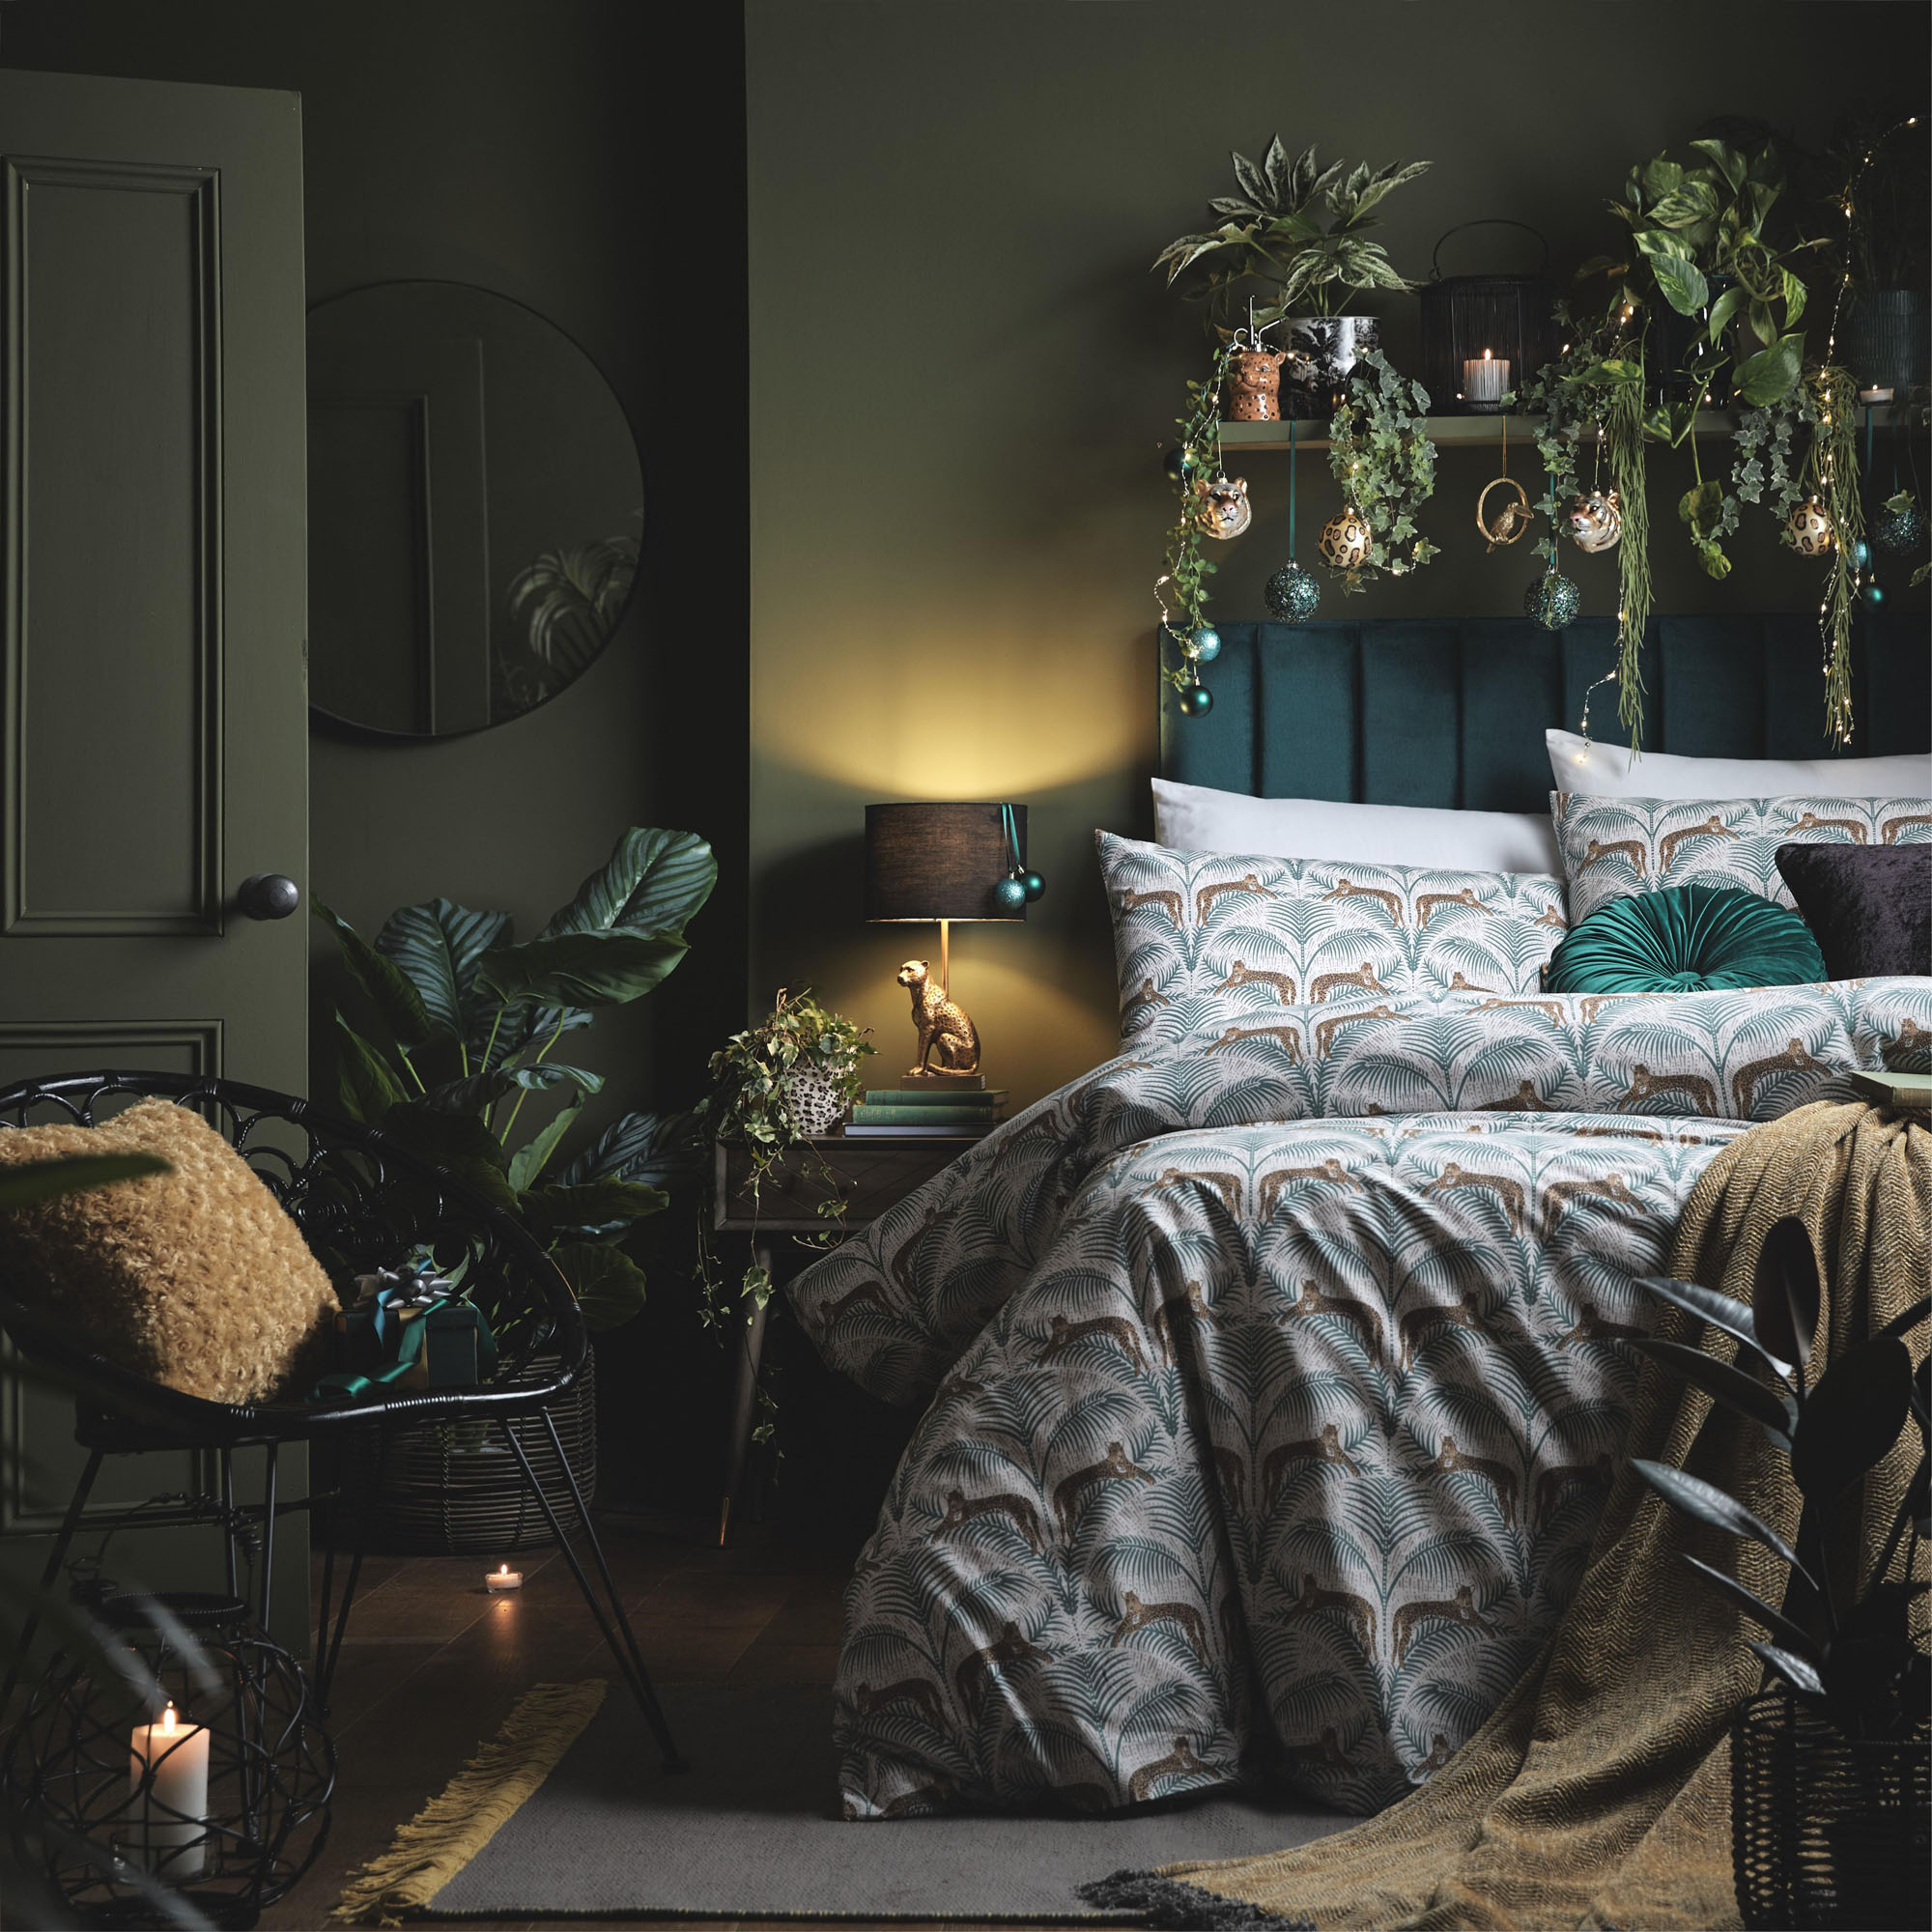 A bedroom with dark green wall paint decor, leopard print bedding and shelfie with baubles and plants